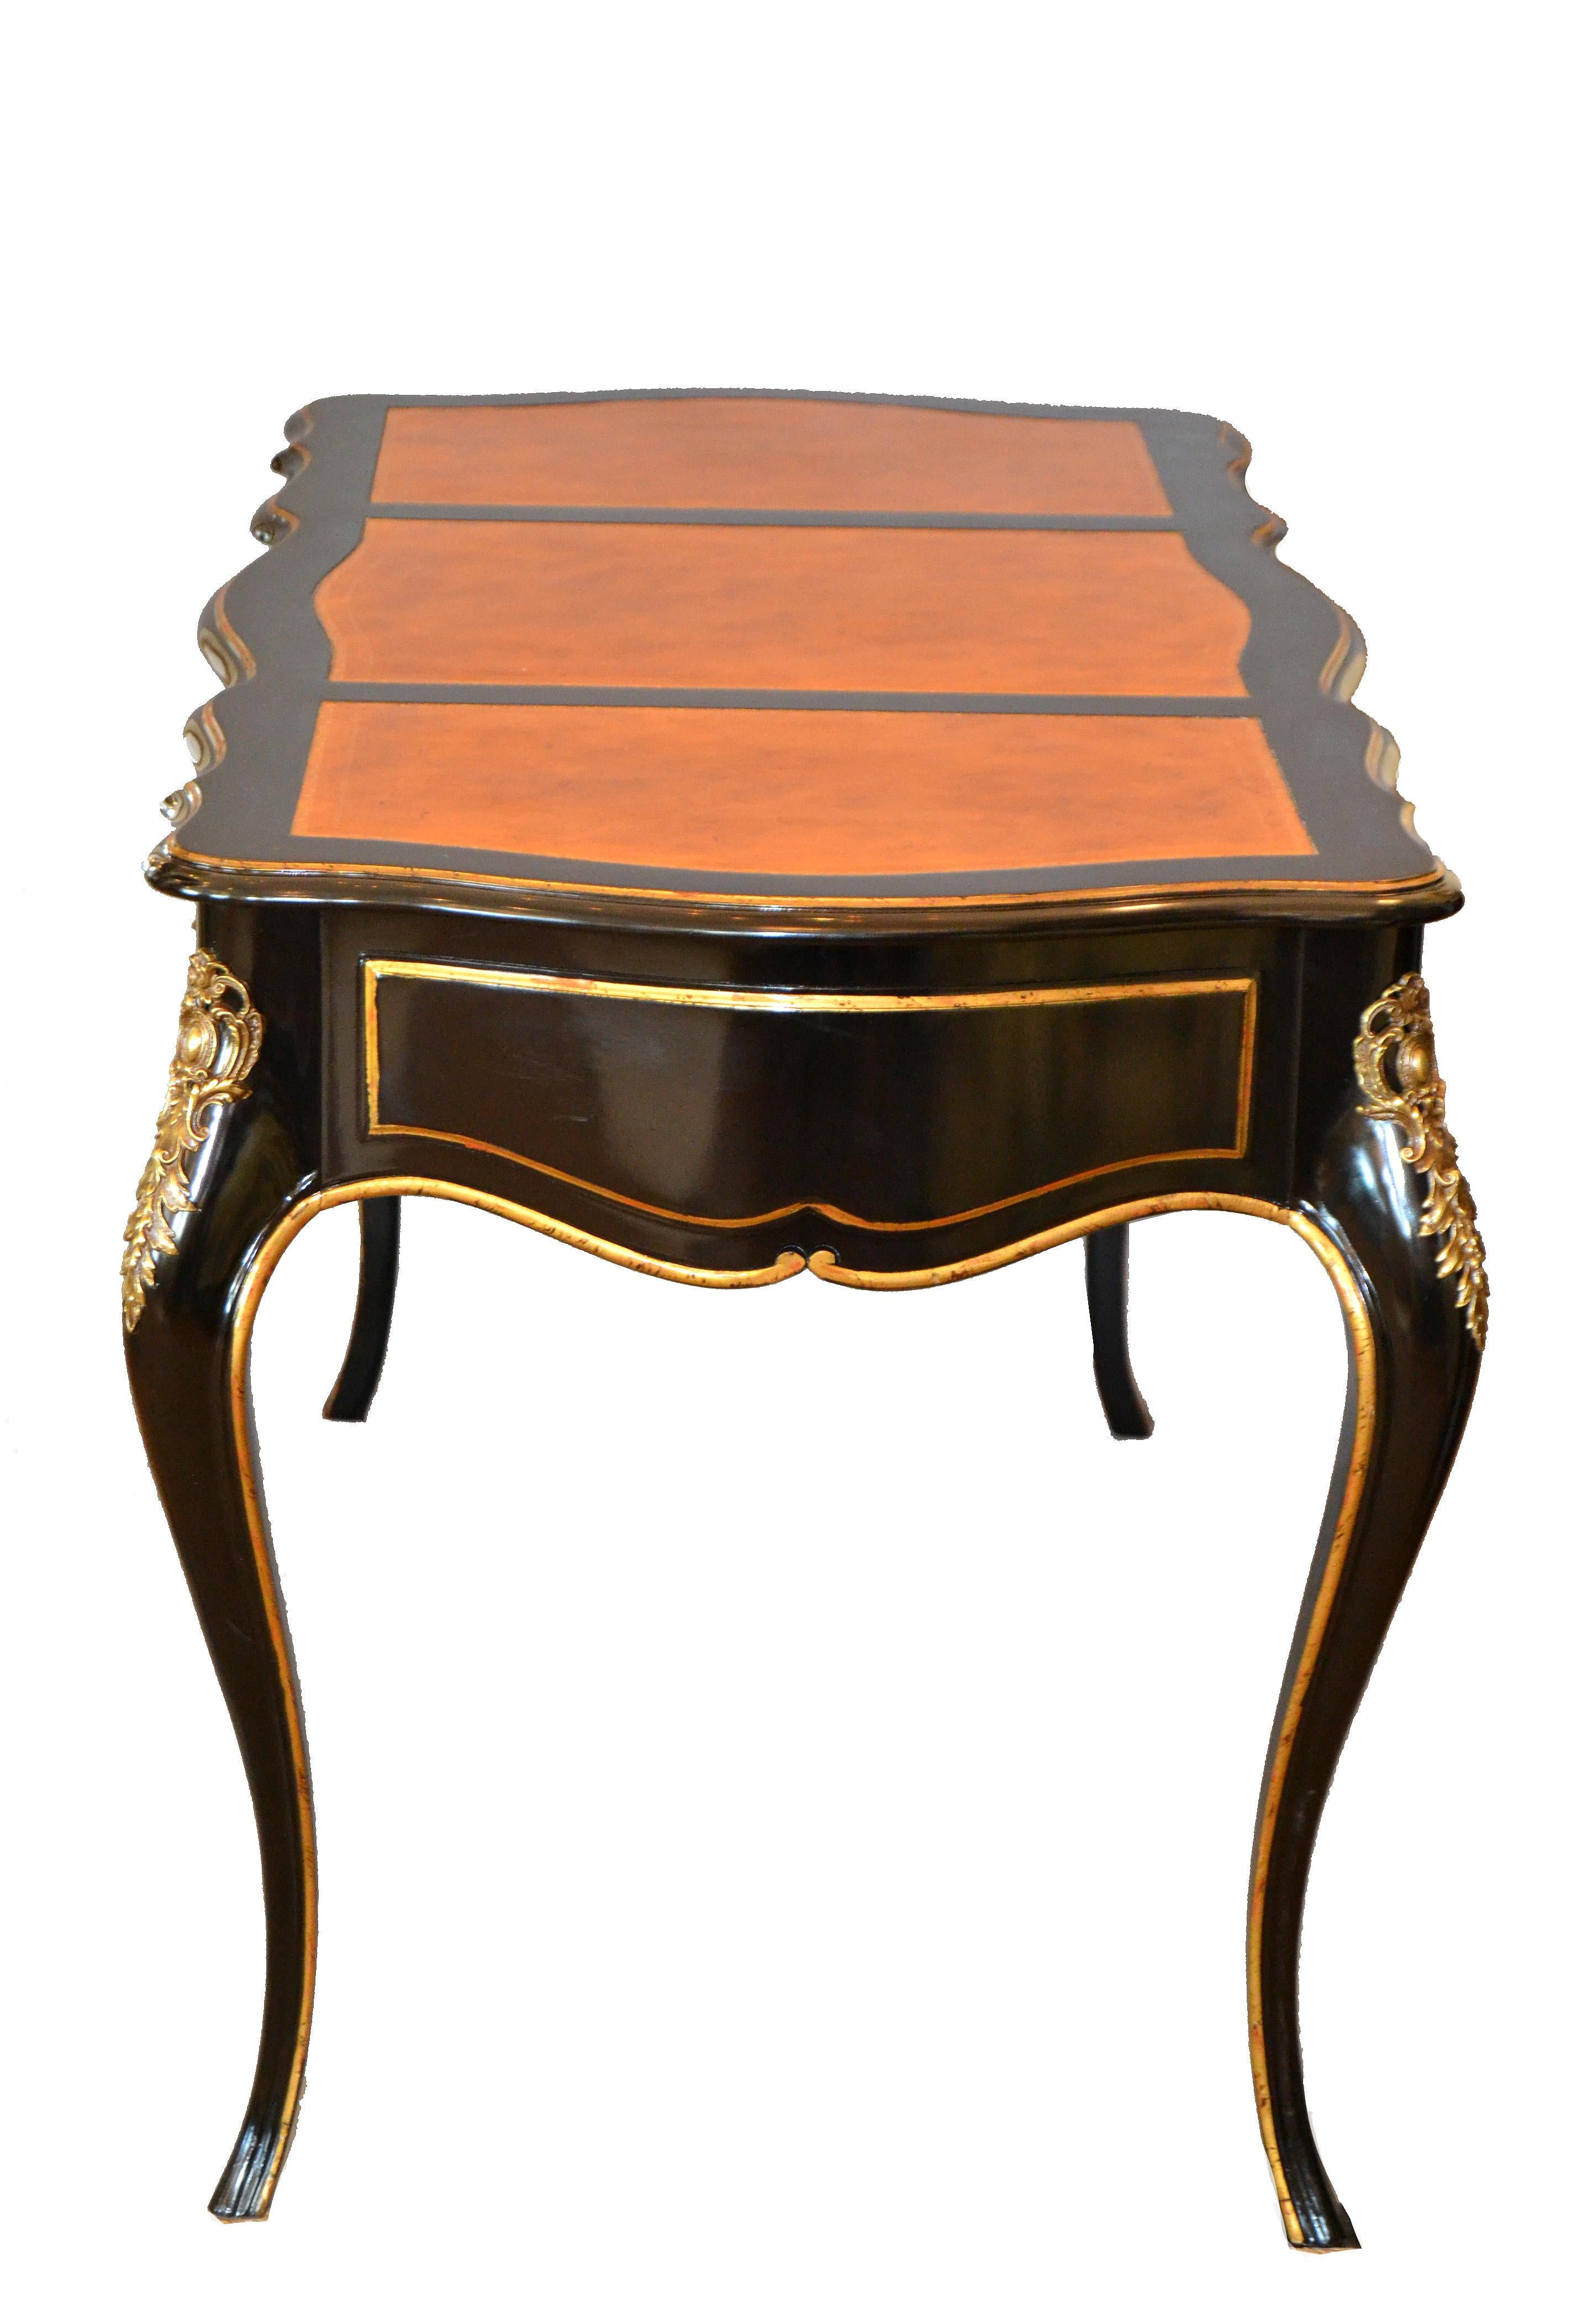 Polished In the Manner of French Louis XV Writing Desk with Stool by Drexel